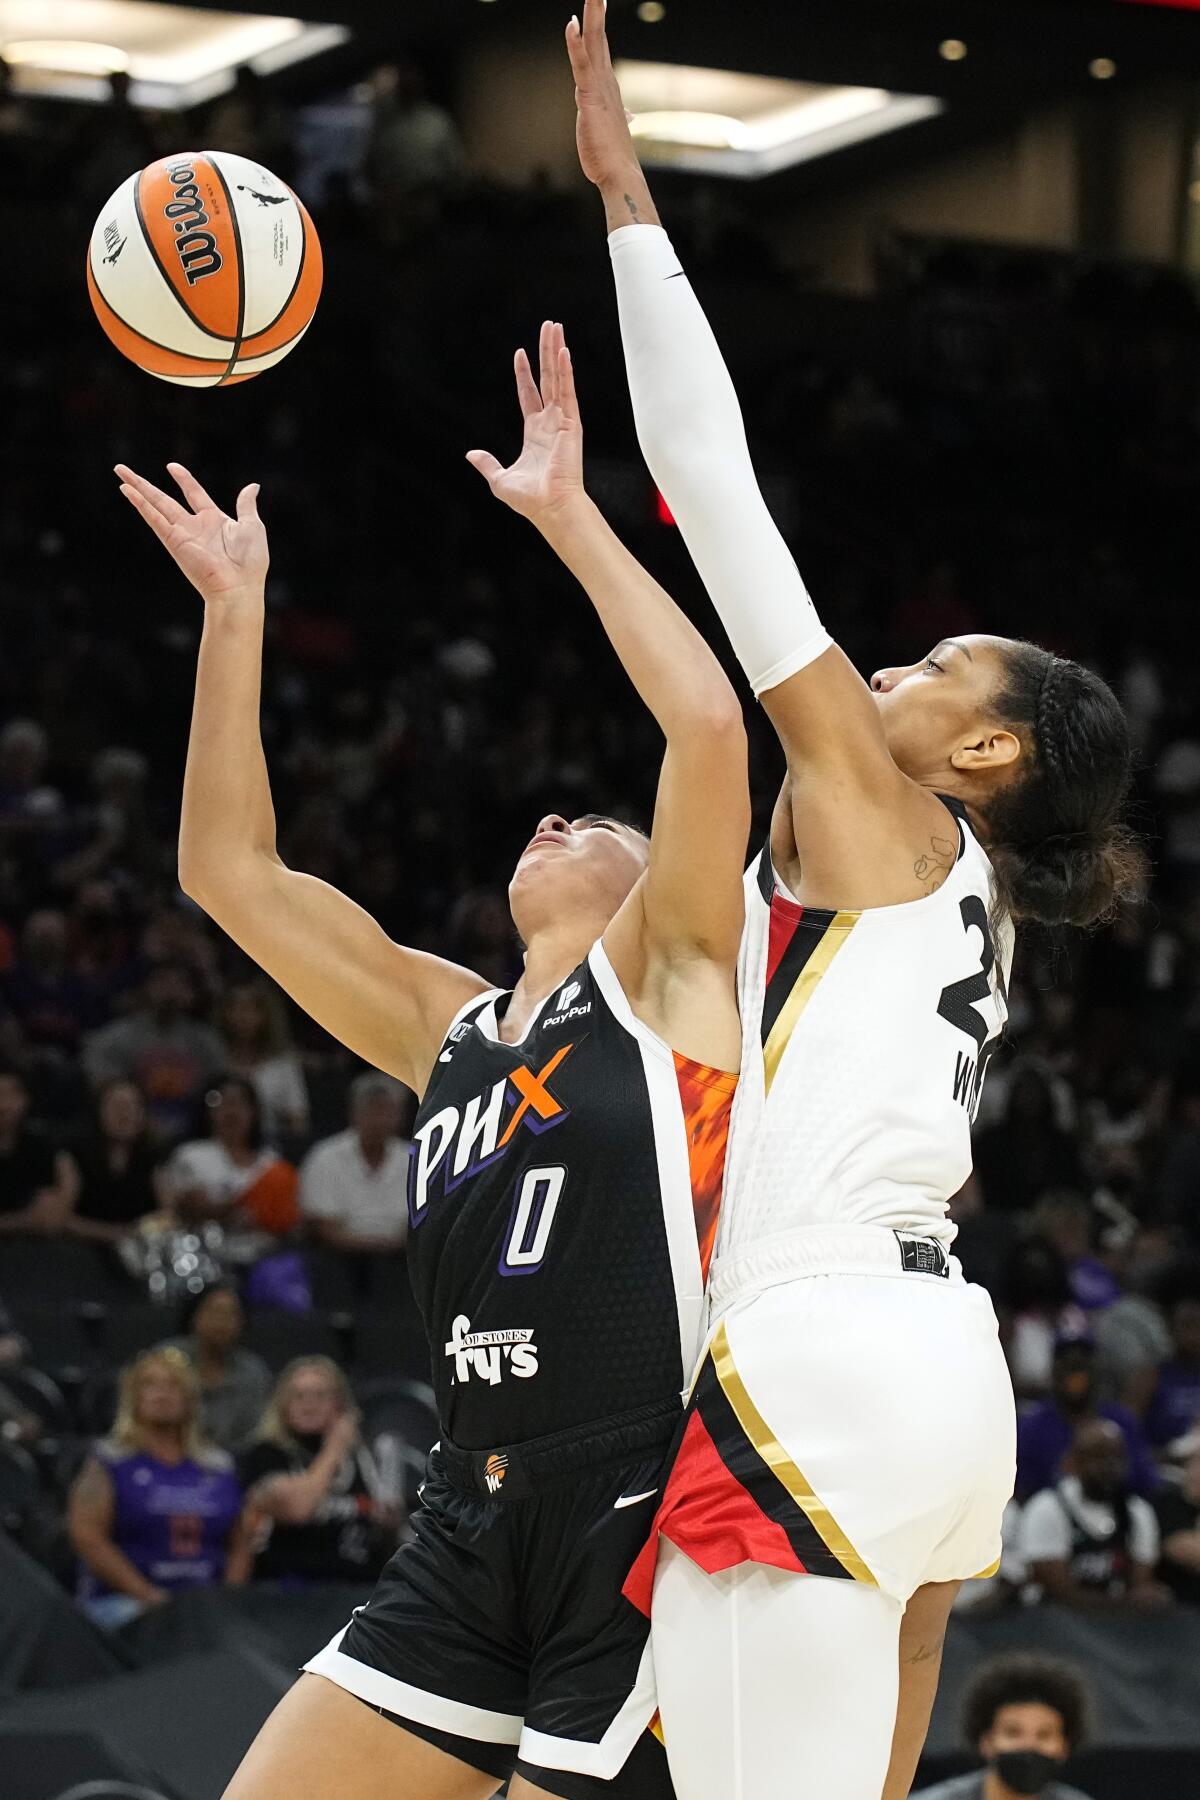 Las Vegas Aces forward A'ja Wilson (22) blocks a shot by Phoenix Mercury guard Kia Nurse during the first half of Game 4 of a WNBA basketball playoff series Wednesday, Oct. 6, 2021, in Phoenix. Nurse was hurt on the play and did not play again in the first half. (AP Photo/Rick Scuteri)